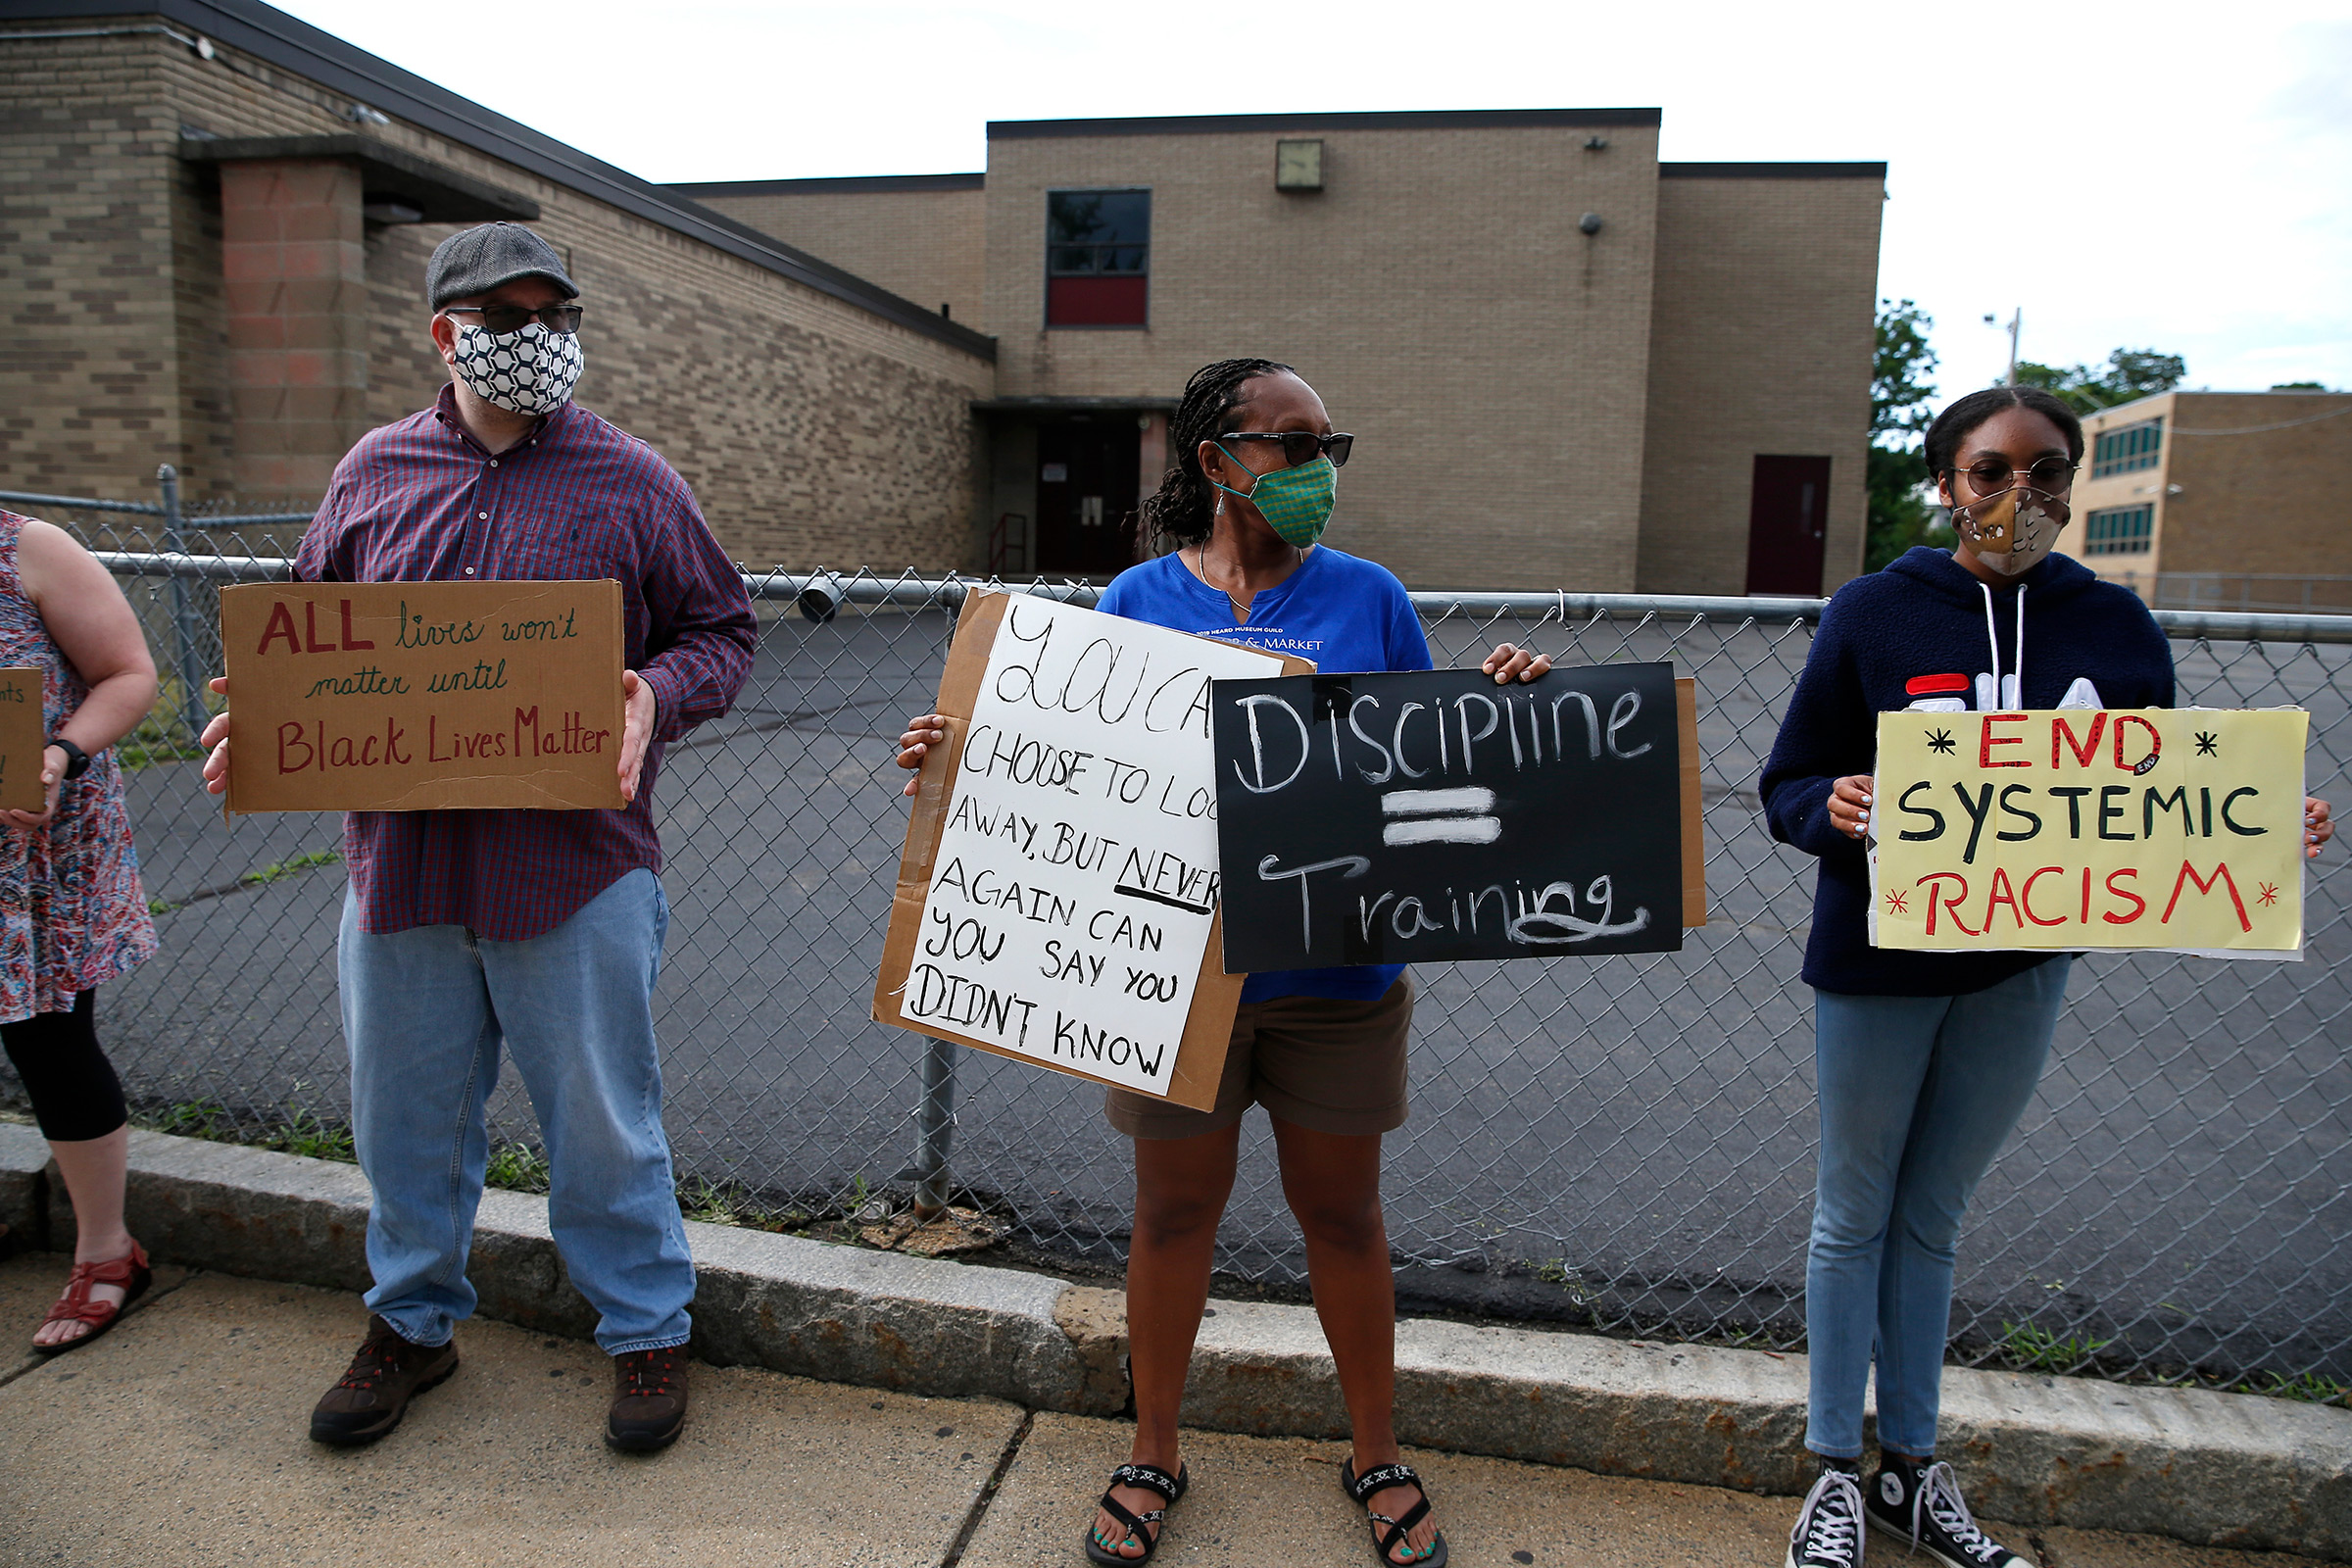 Andrea and Thora Henry protest with others outside of Mystic Valley Charter School in Malden on July 1, 2020 (Jessica Rinaldi—The Boston Globe/Getty Images)